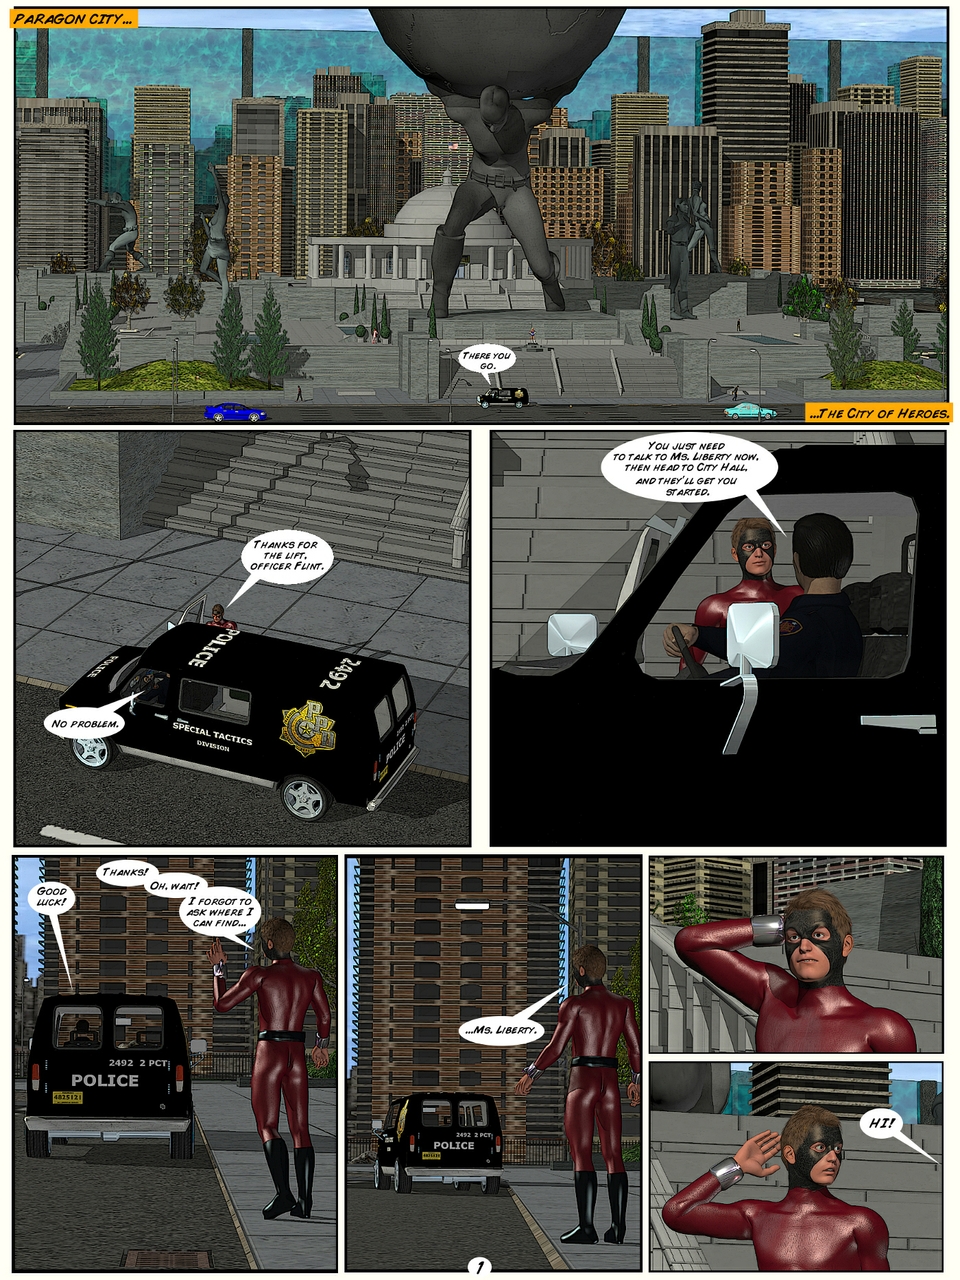 Issue 1 - New Kid on the Block - Page 1